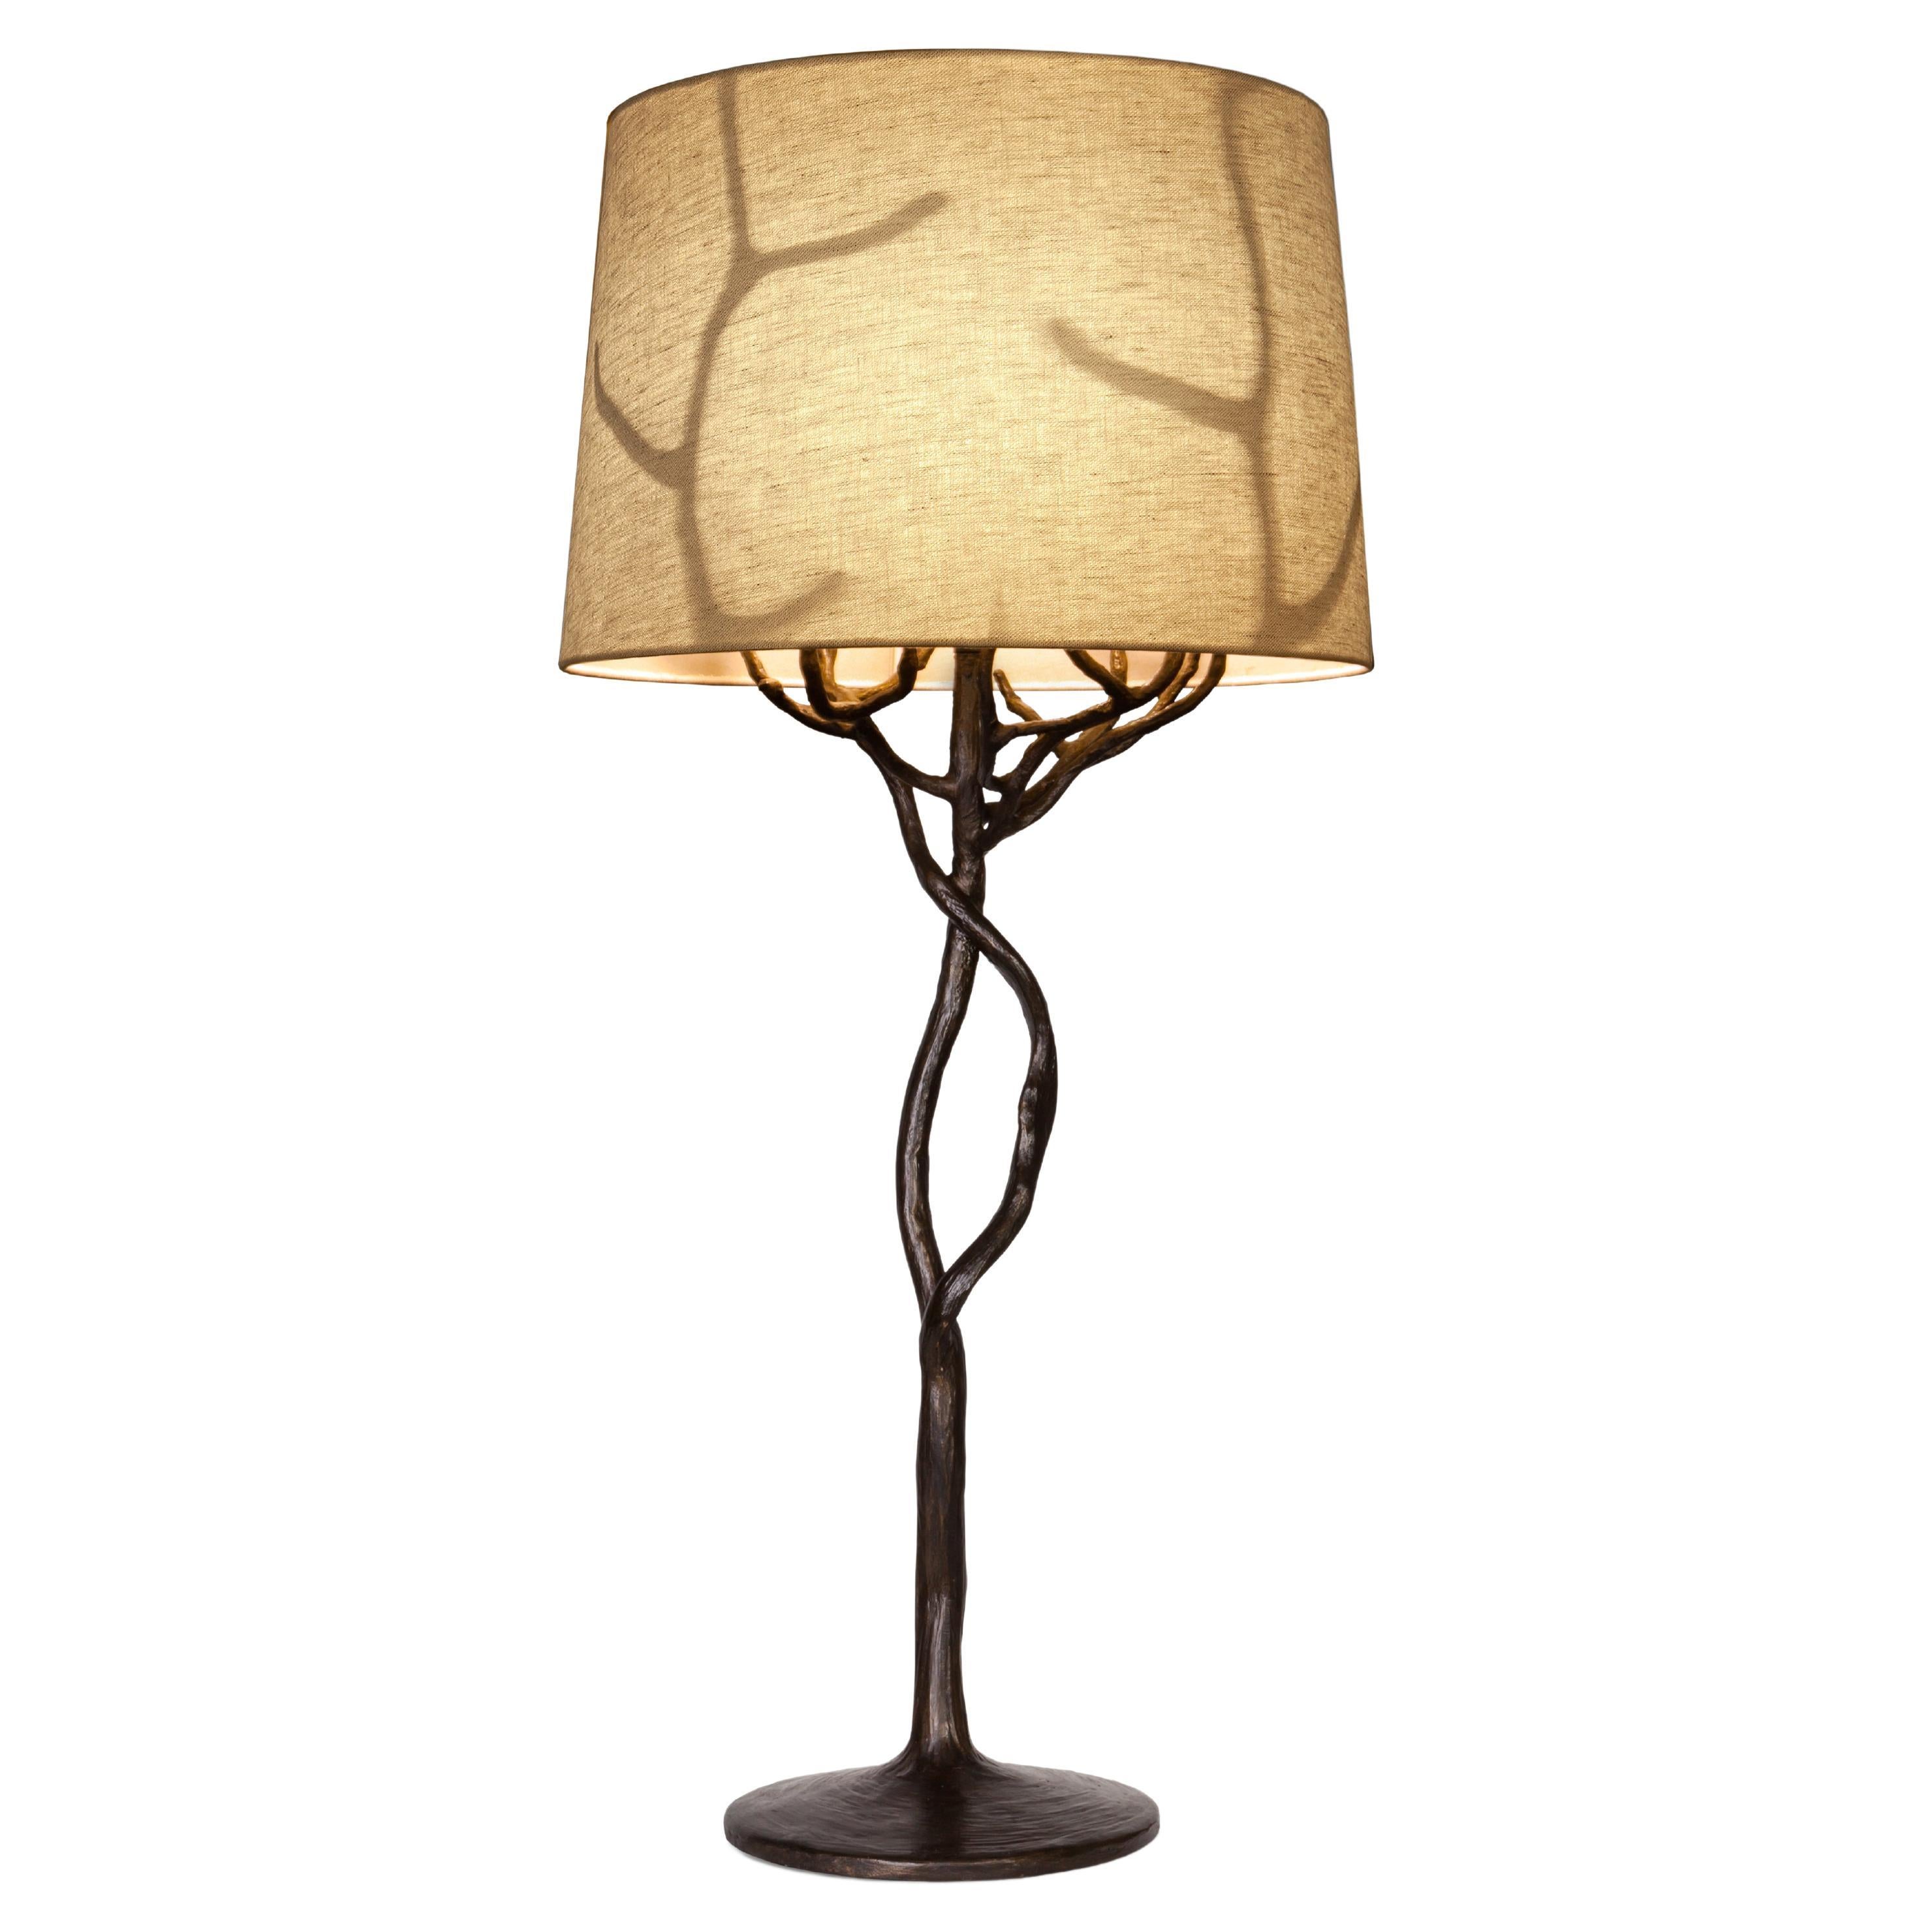 Organic Table Lamp “Etna” in Forest Brown Finish, Benediko For Sale